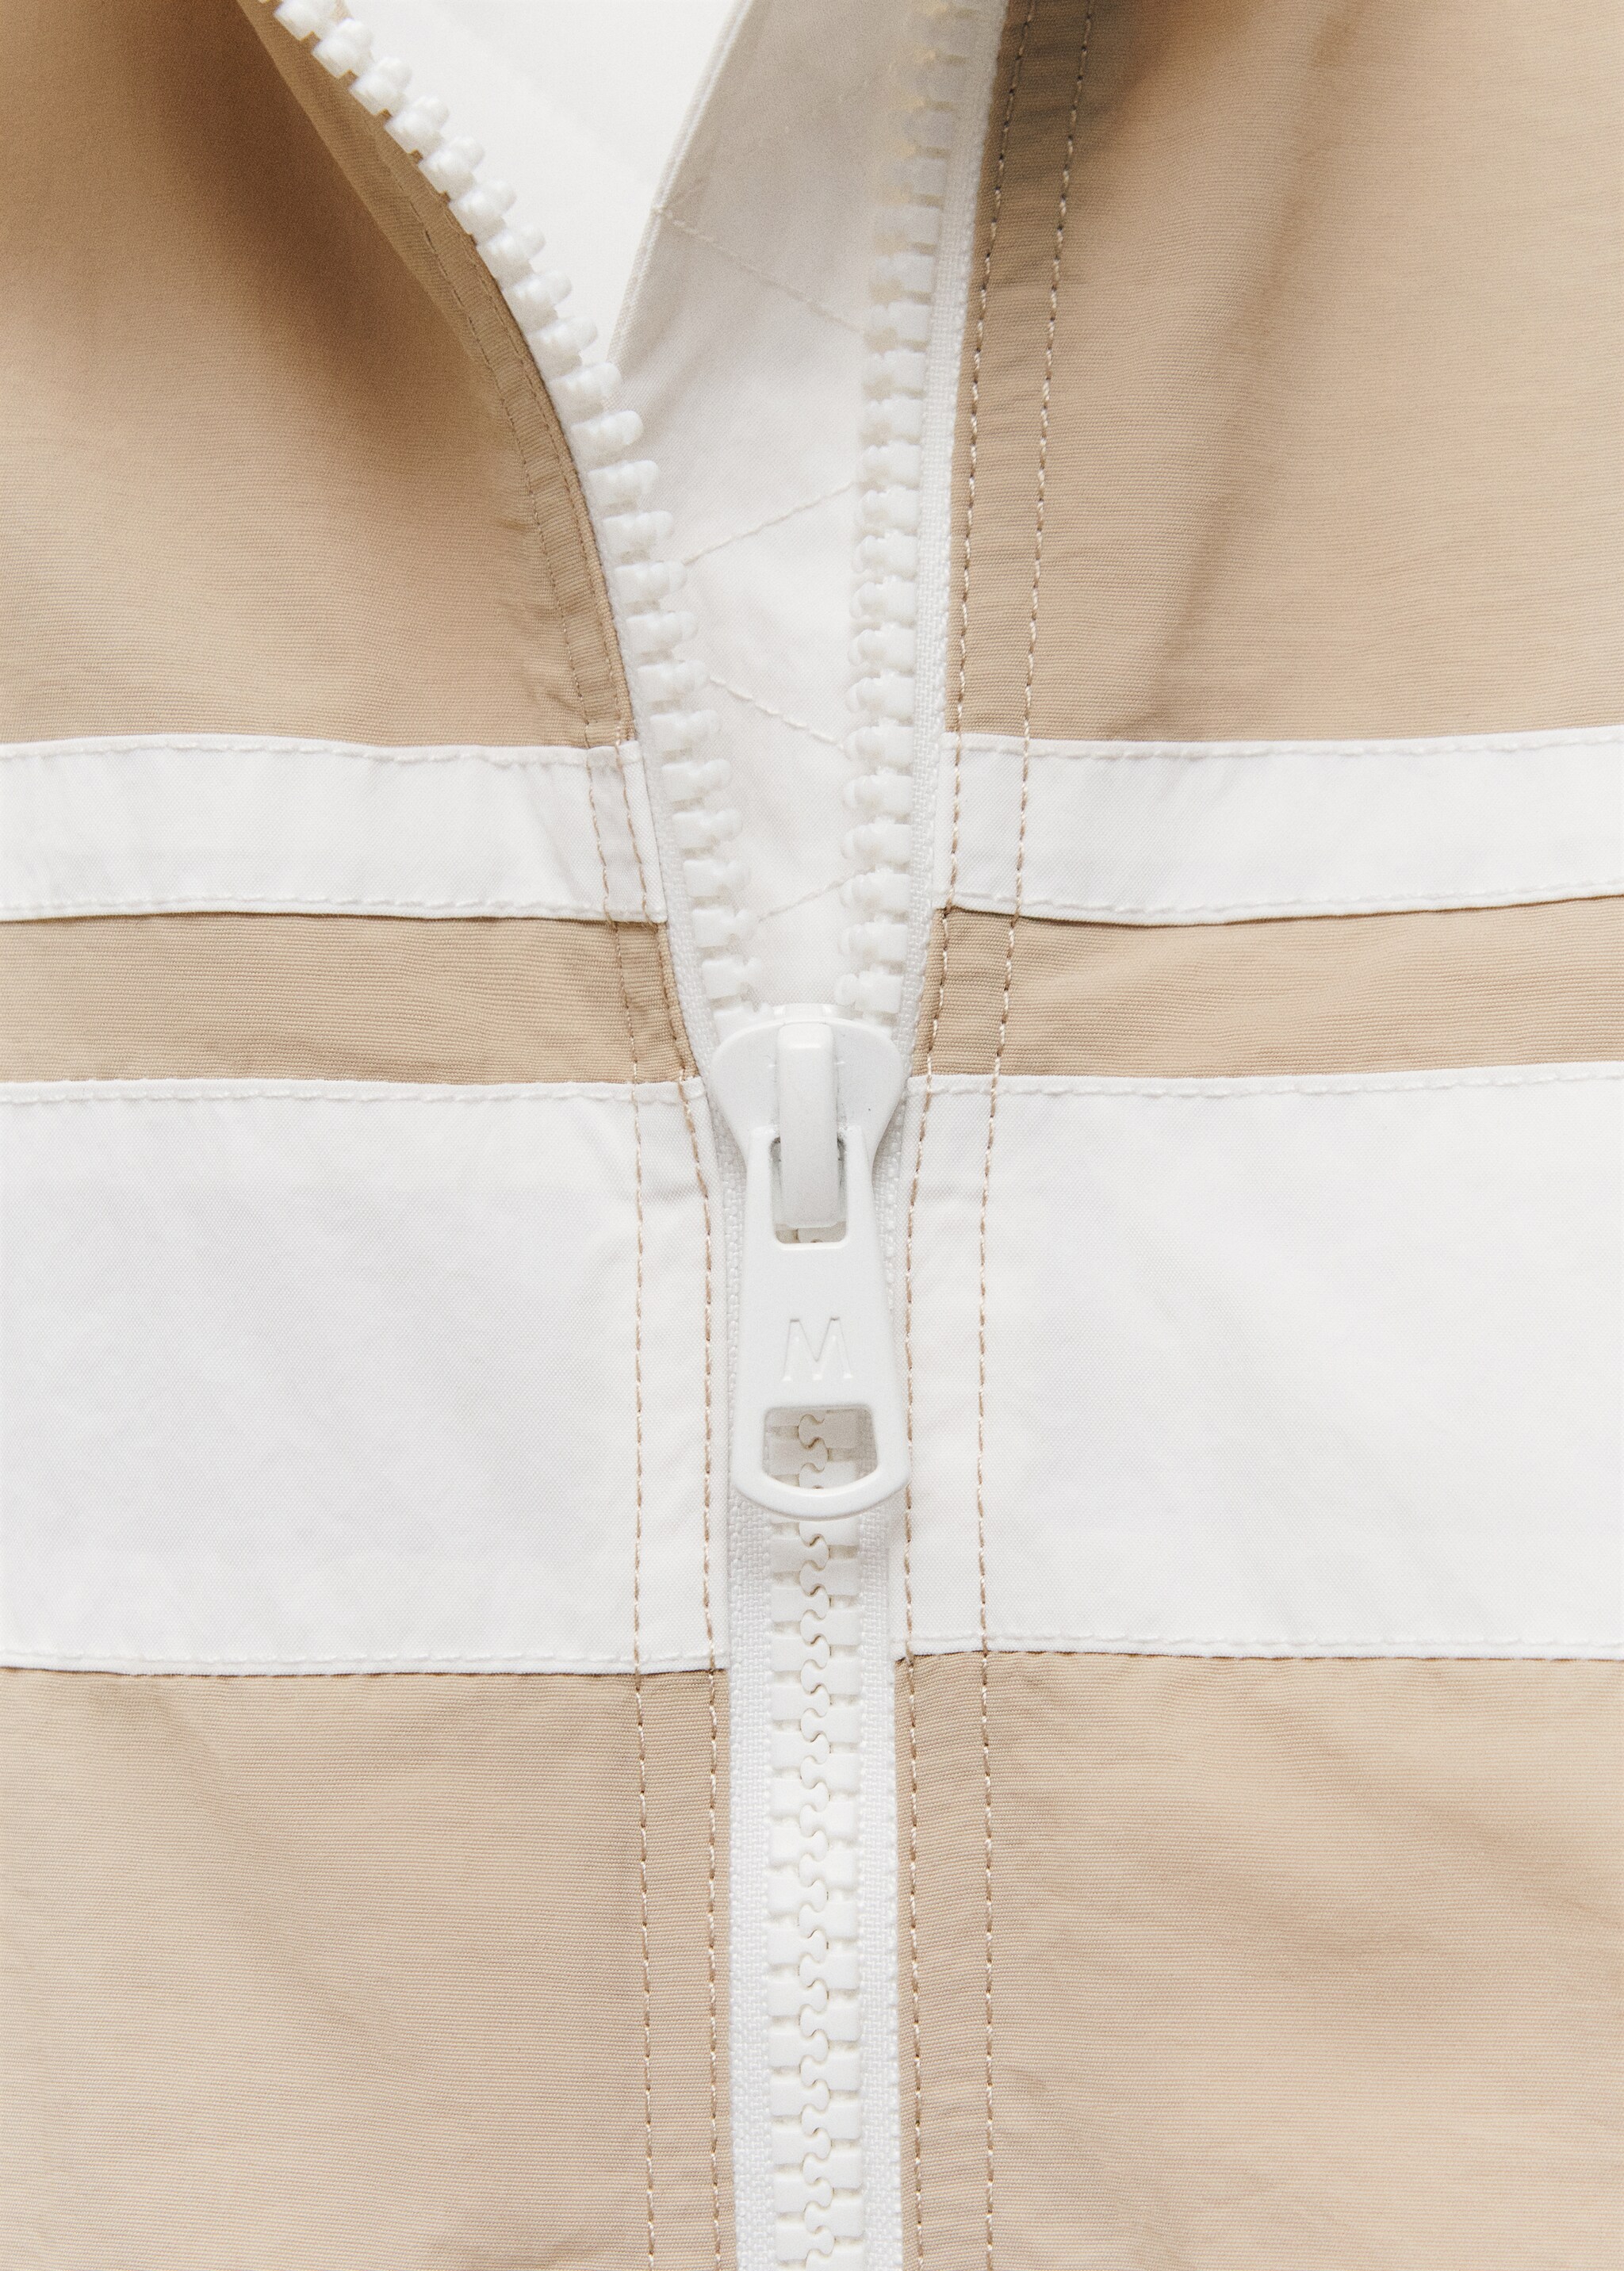 Bomber jacket with padded inner  - Details of the article 8